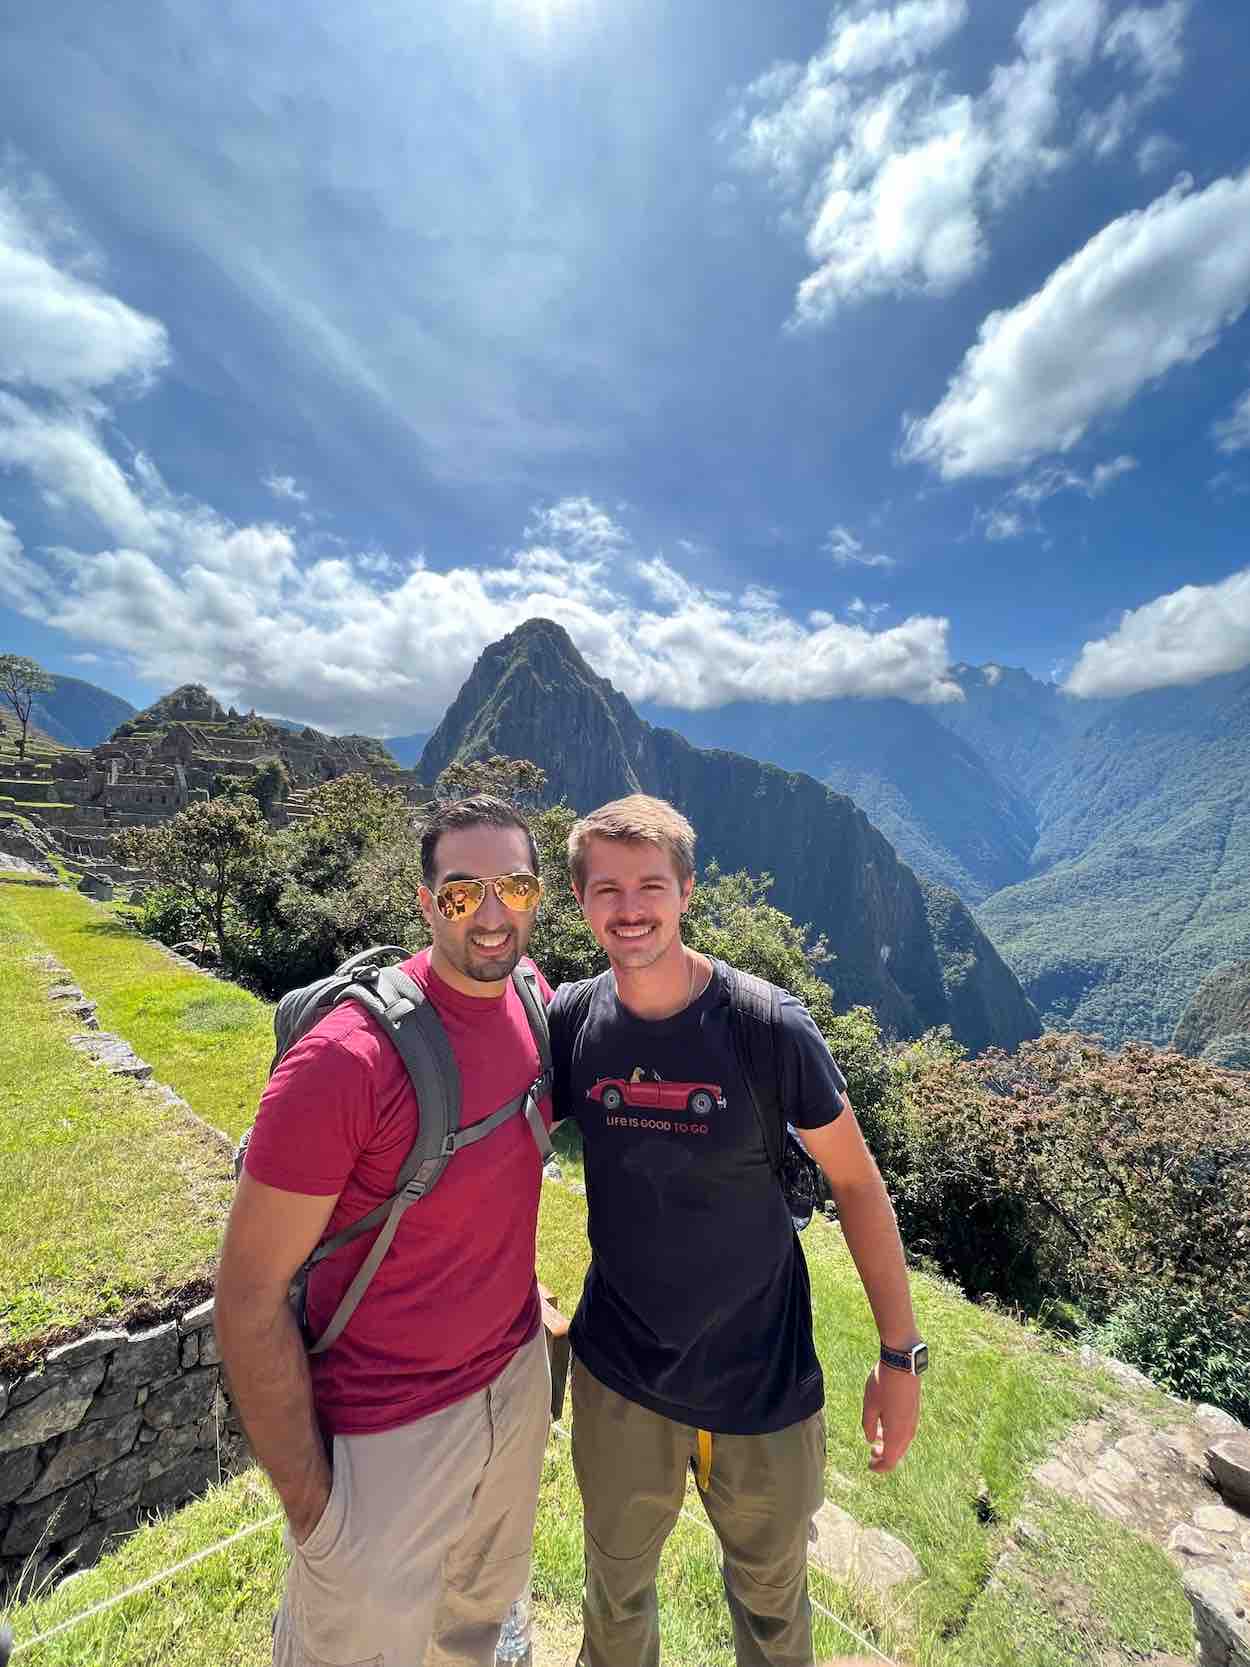 Matt Knerr and Dr. Jacob Jabbour, at the time a plastic surgery/hand fellow at the University of Mississippi Medical Center, hike to Machu Picchu after attending the ICOPLAST First World Congress in Lima, Peru. Submitted photo